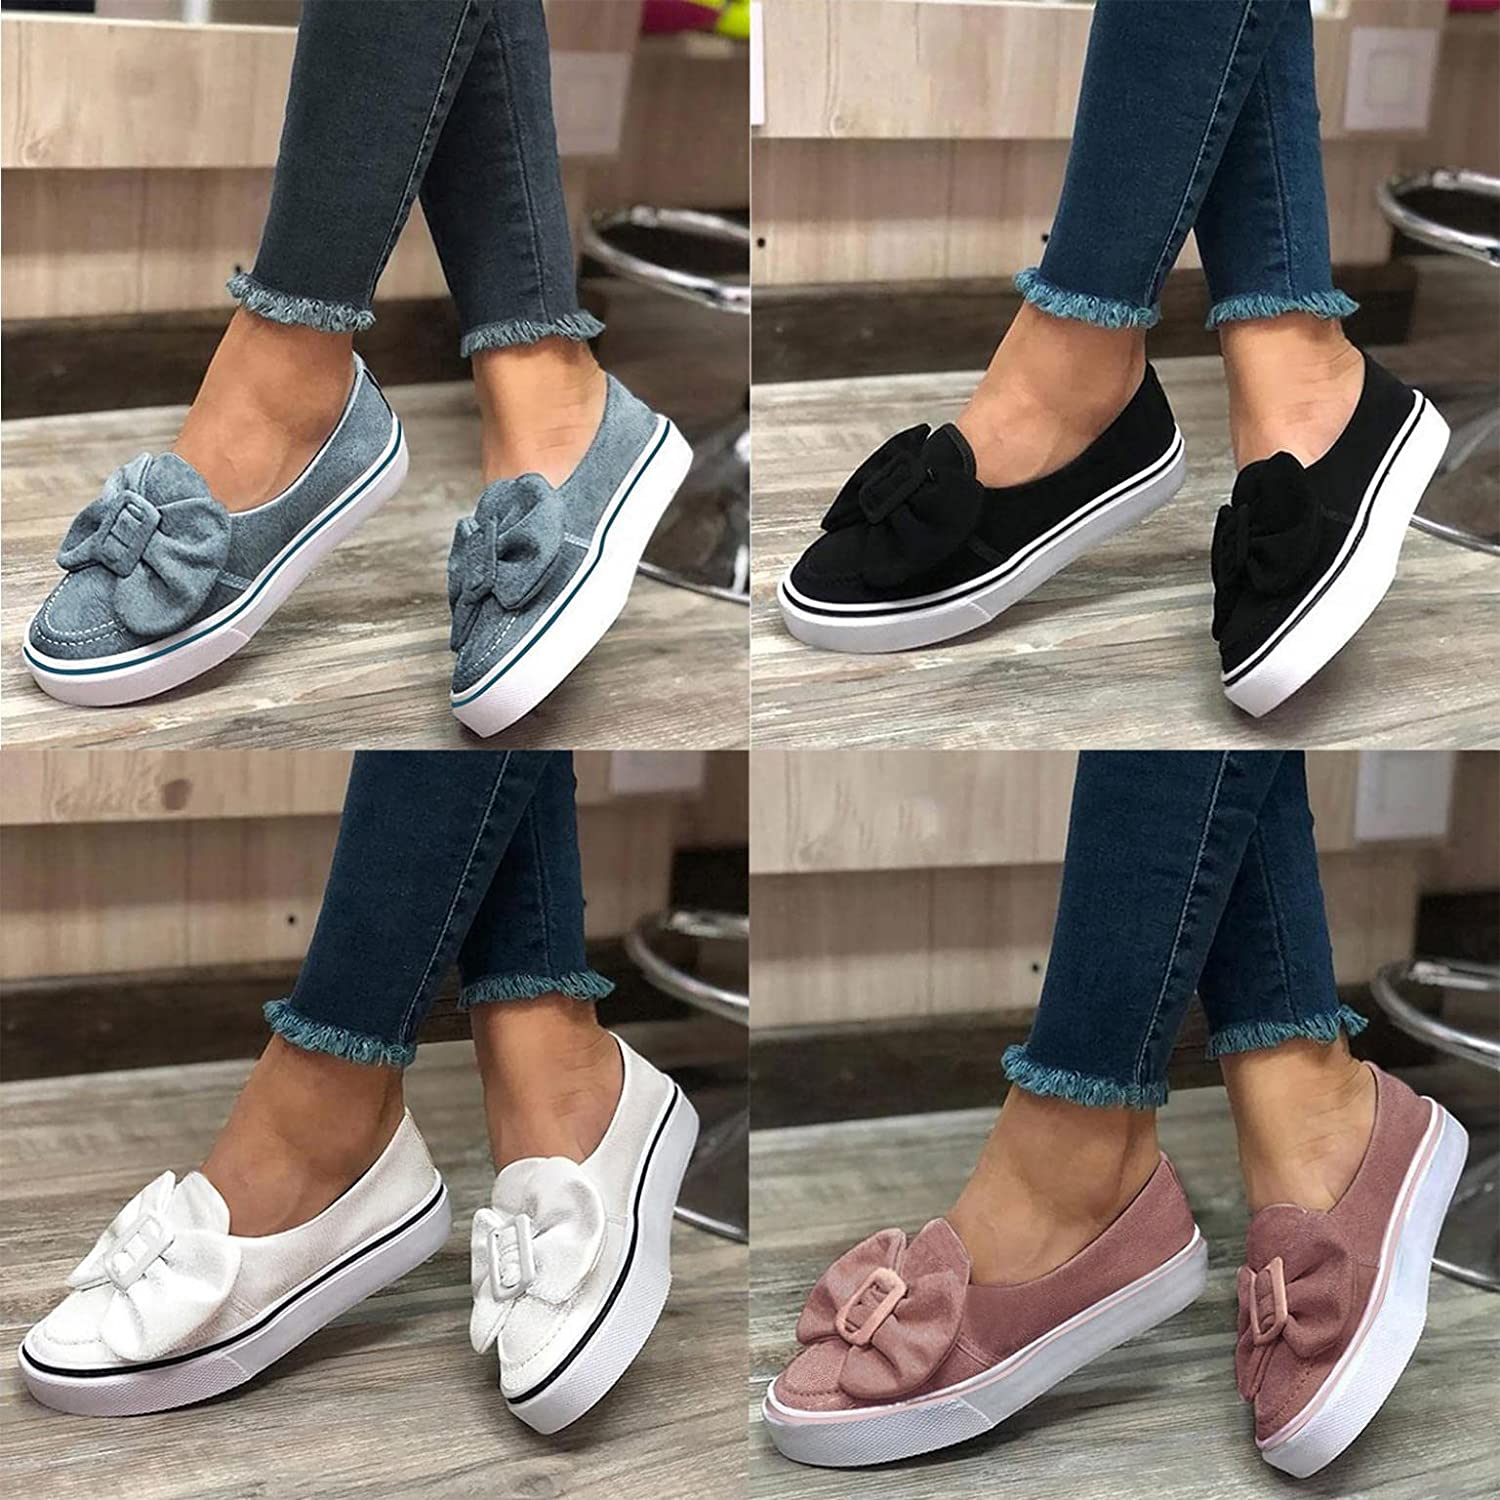 Wedge Sneakers for Women Leather Comfortable Slip on Canvas Fashion Sneakers Bow Loafers Flat Casual Shoes for Walking